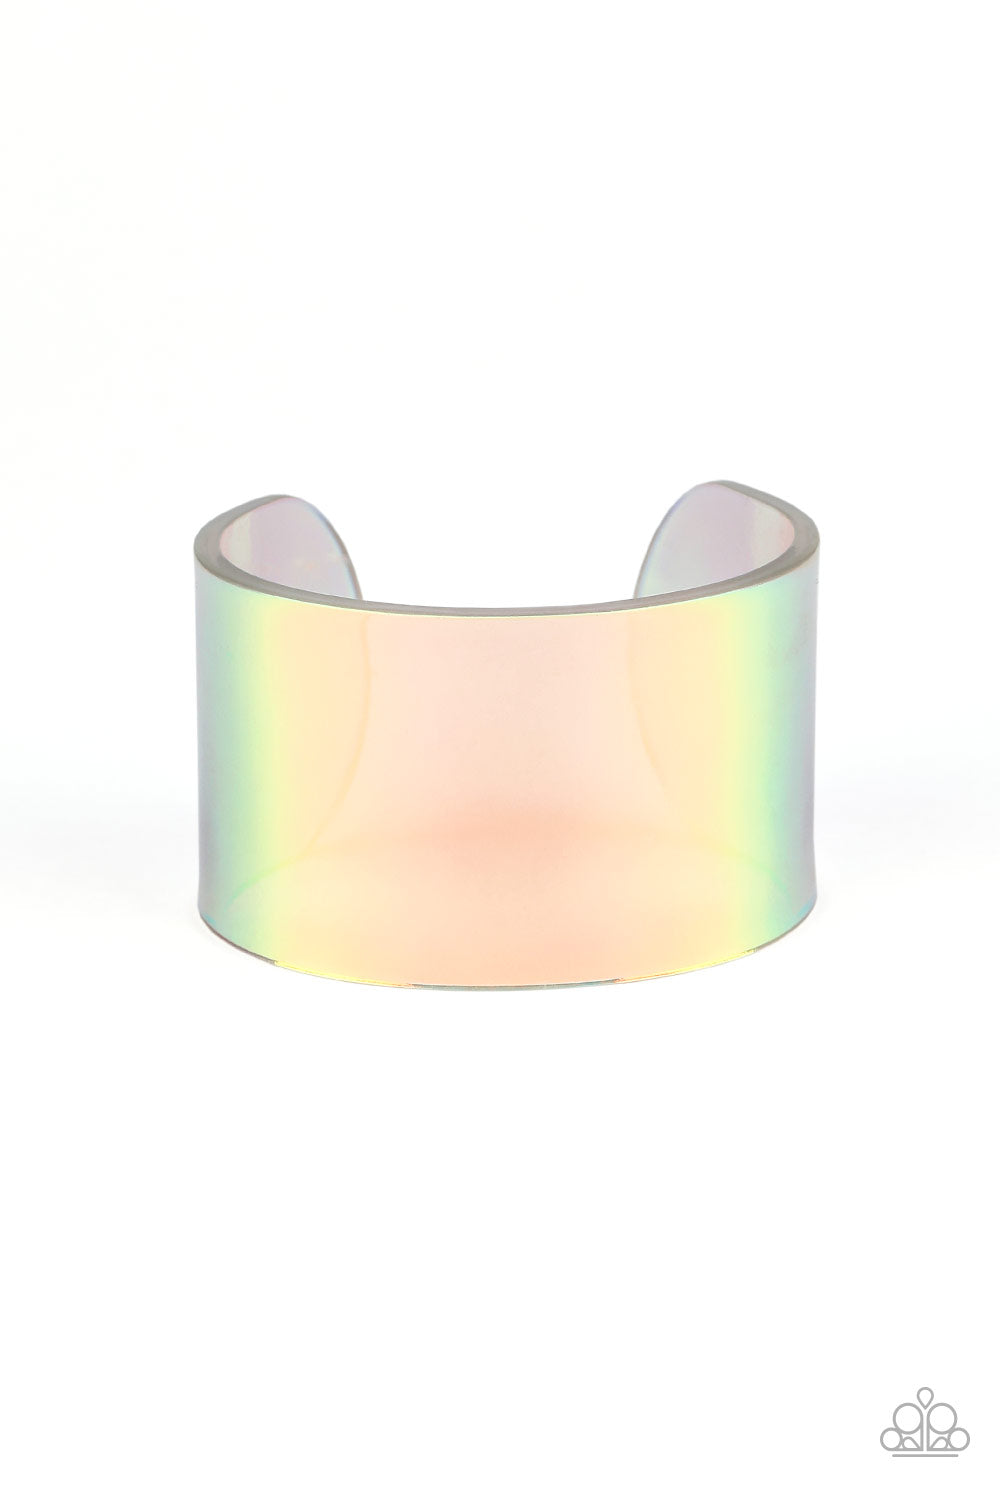 Holographic Aura - Multi Color Cuff Bracelet - Paparazzi Accessories - Featuring a holographic shimmer, a thick multicolored acrylic cuff wraps around the wrist for a retro inspired fashion.